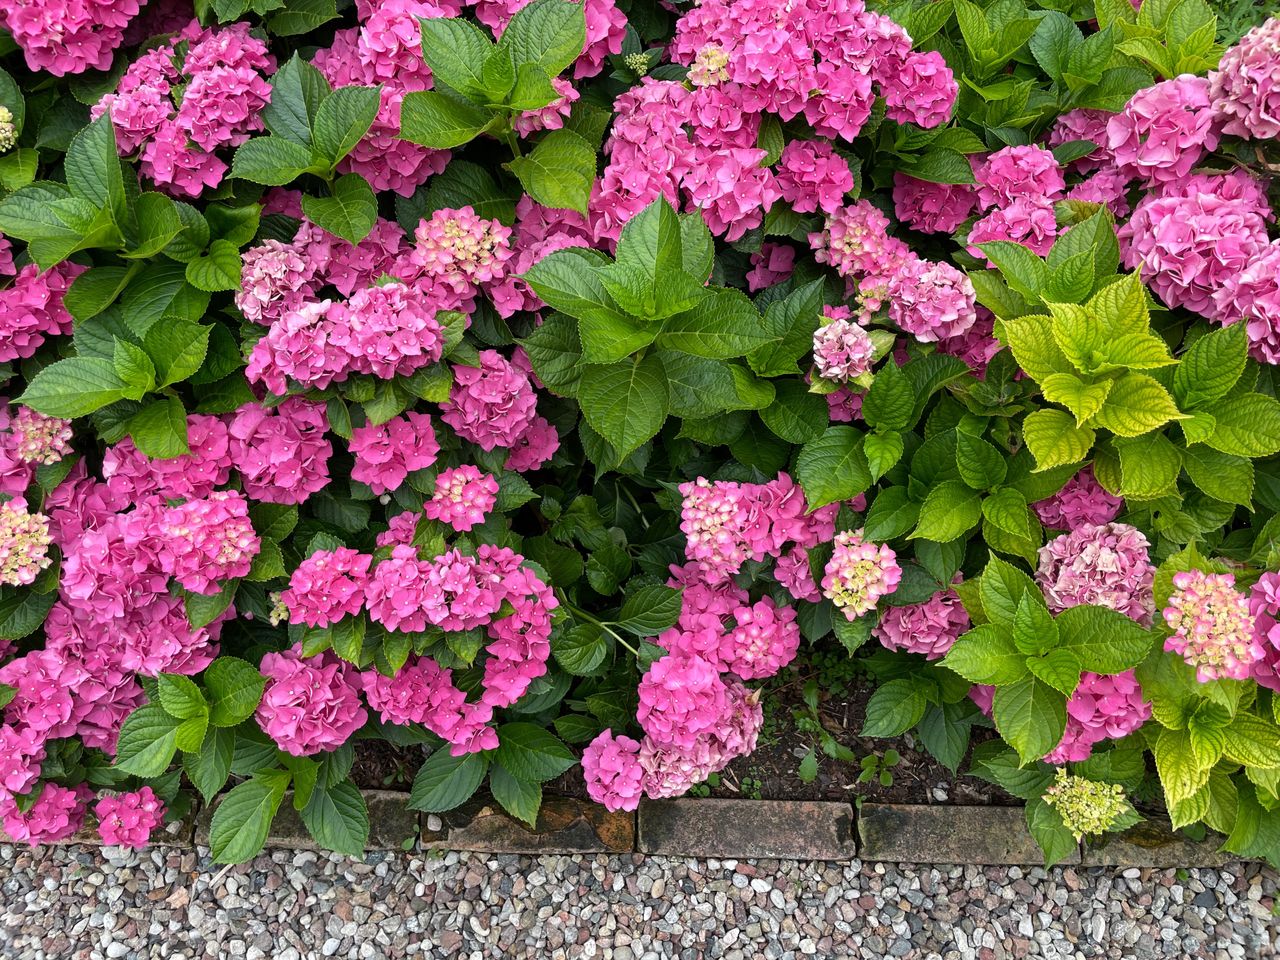 When and how to water hydrangeas for optimal growth